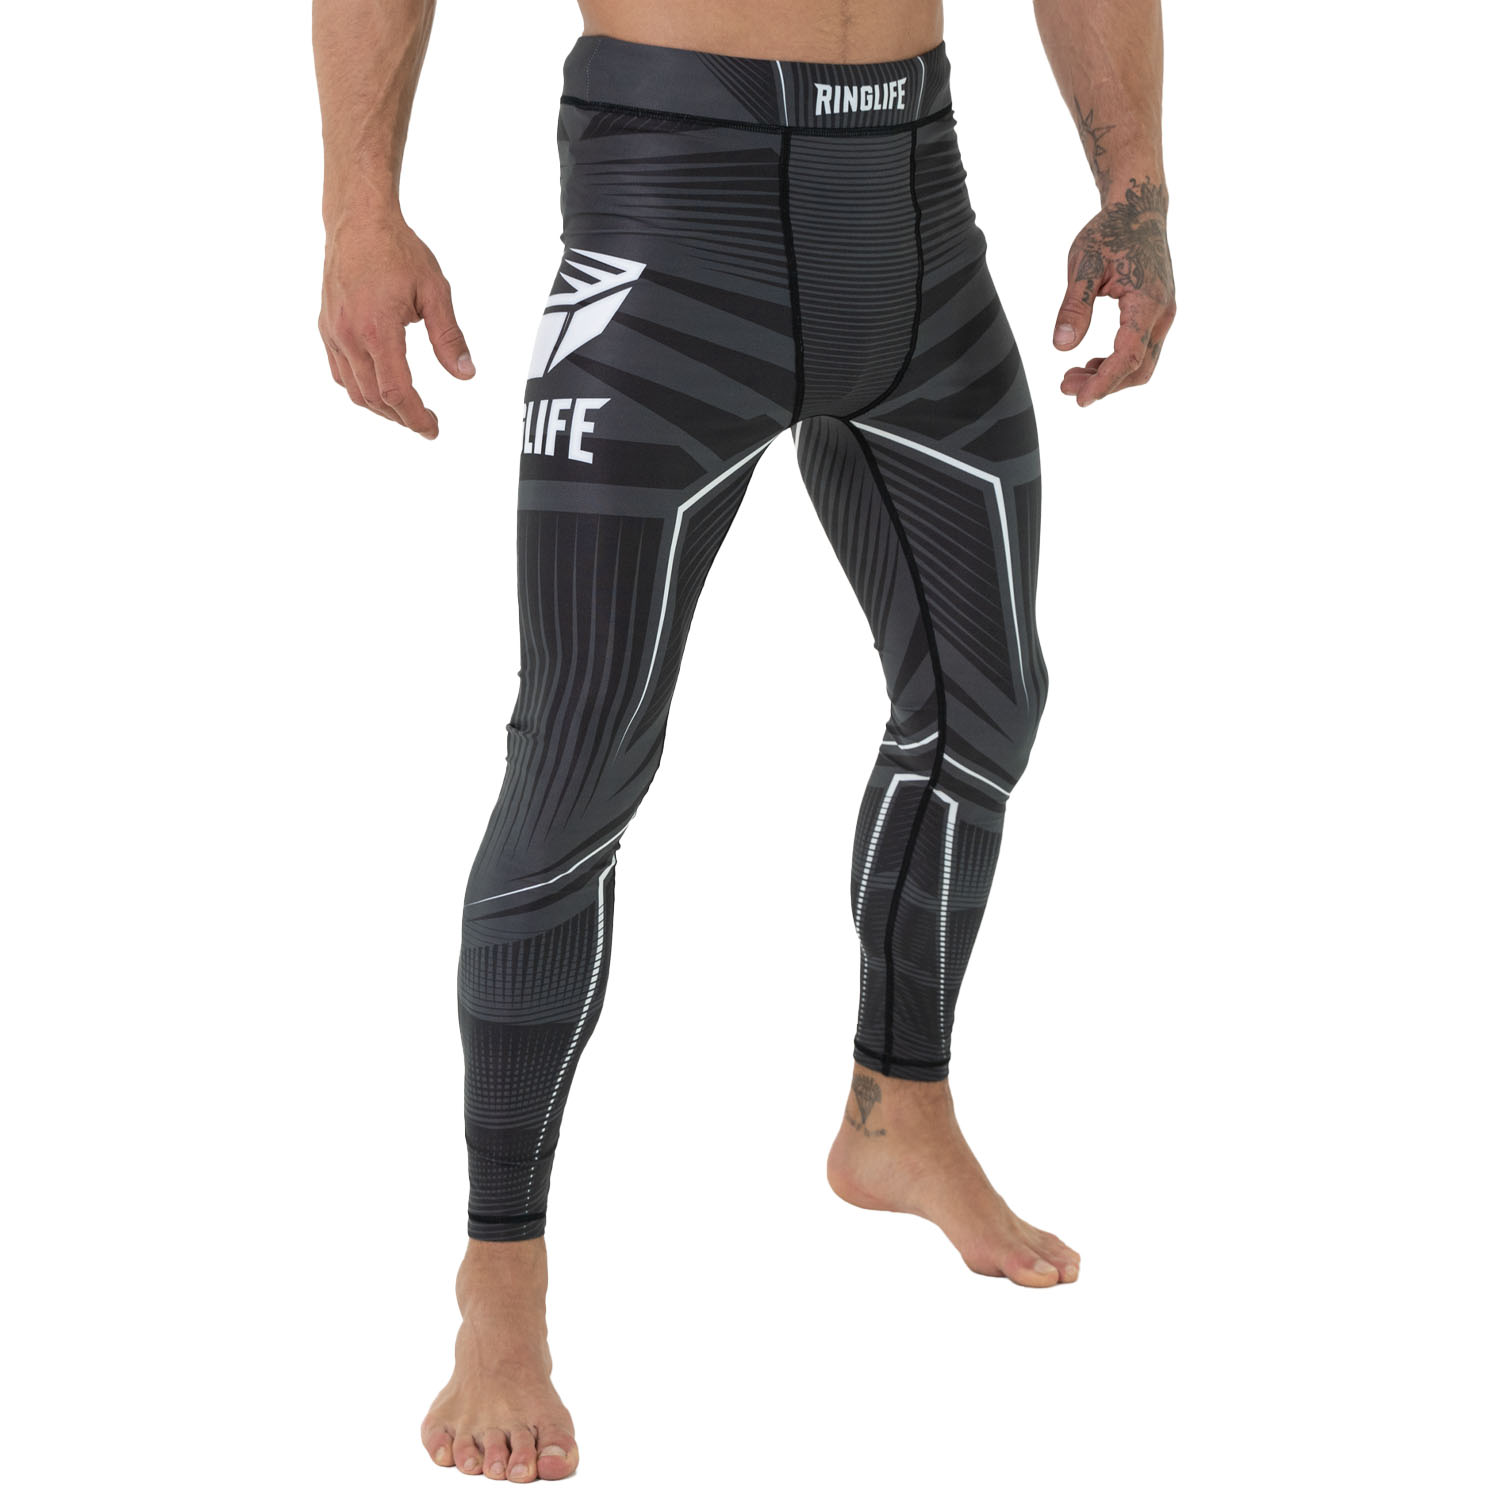 RINGLIFE Compression Pants - Octaring black-white M